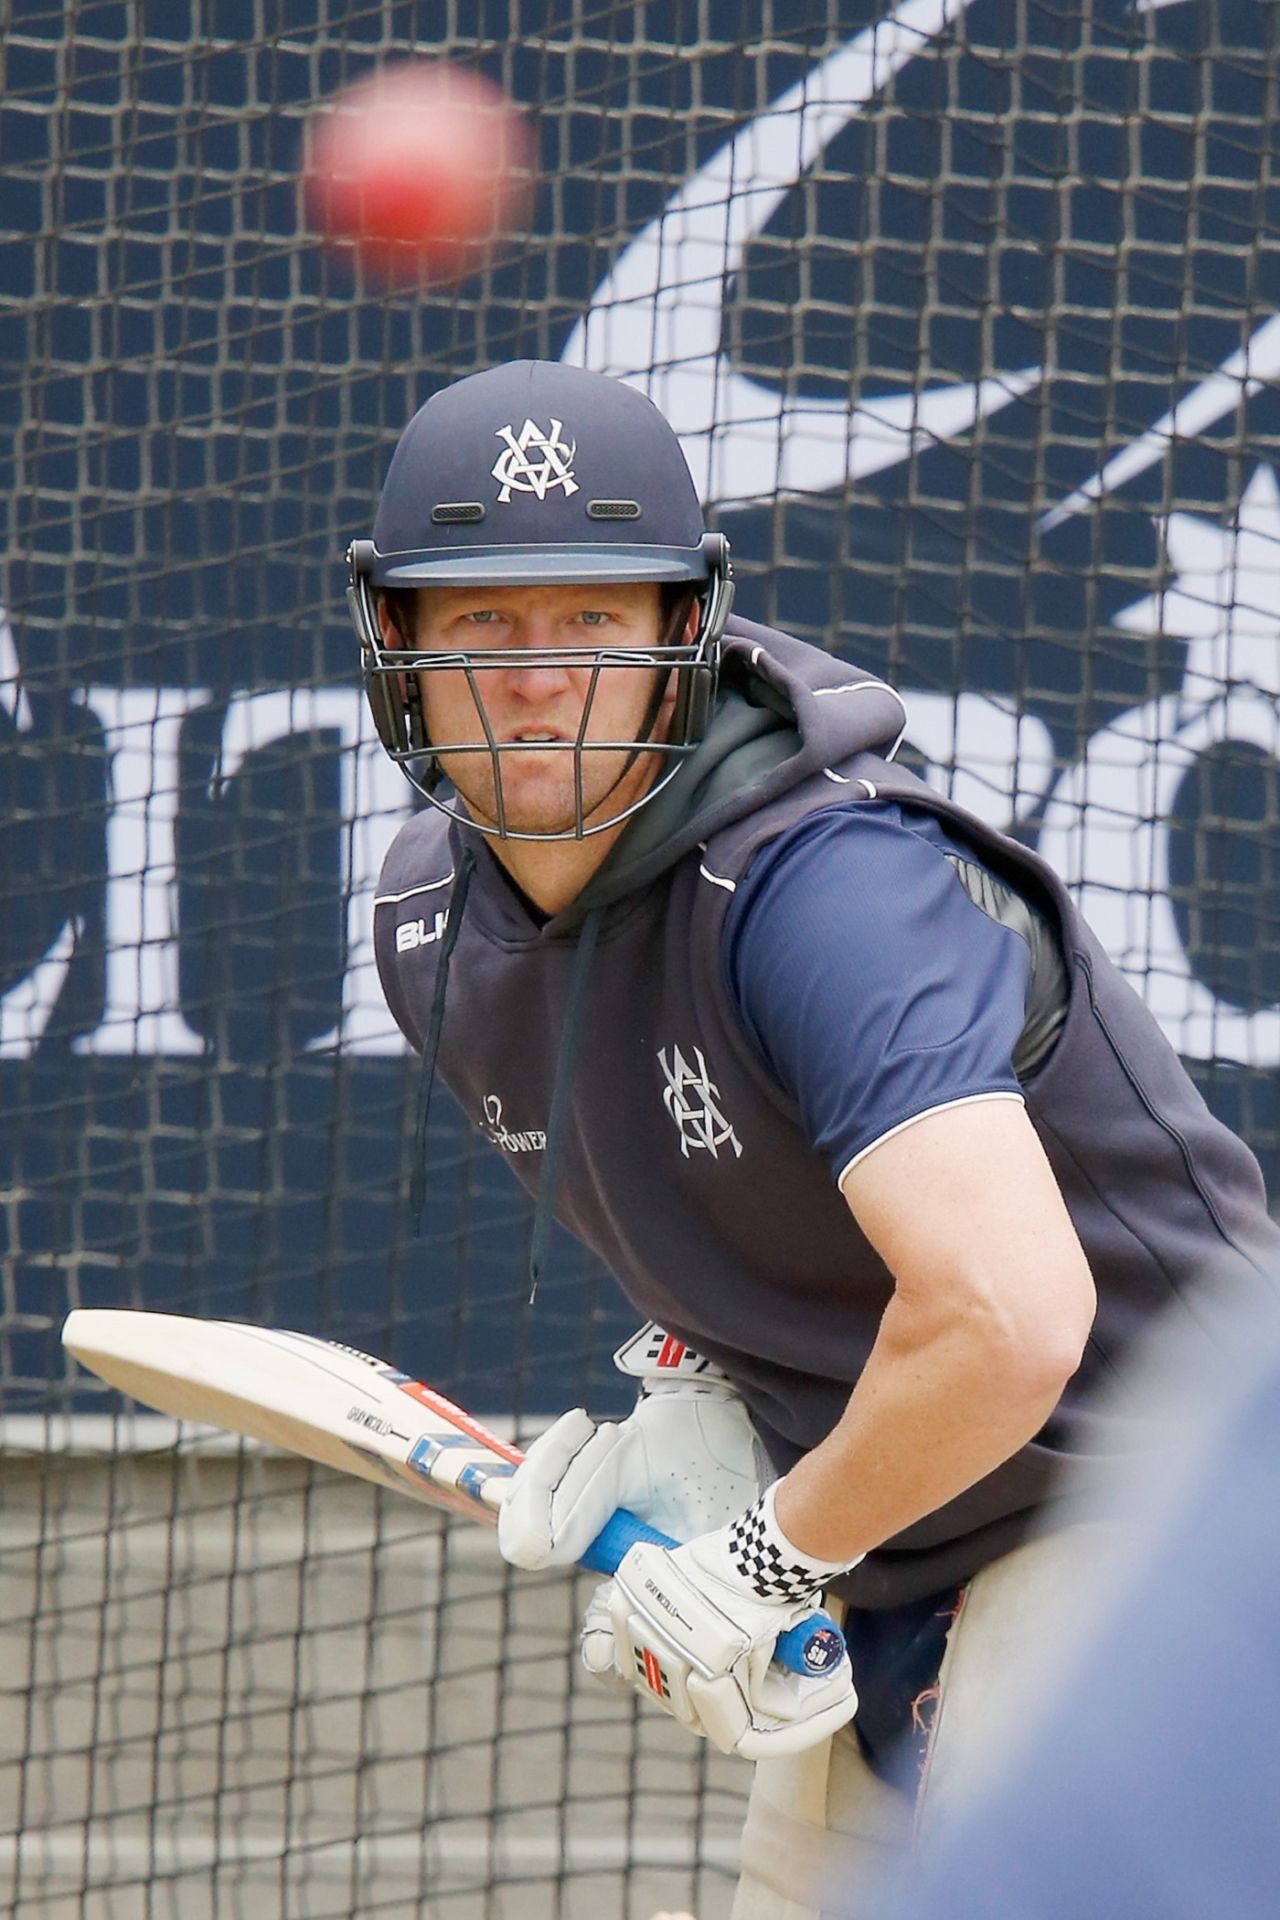 Cameron White bats in the nets, Sheffield Shield 2018-19, Melbourne, October 24, 2018